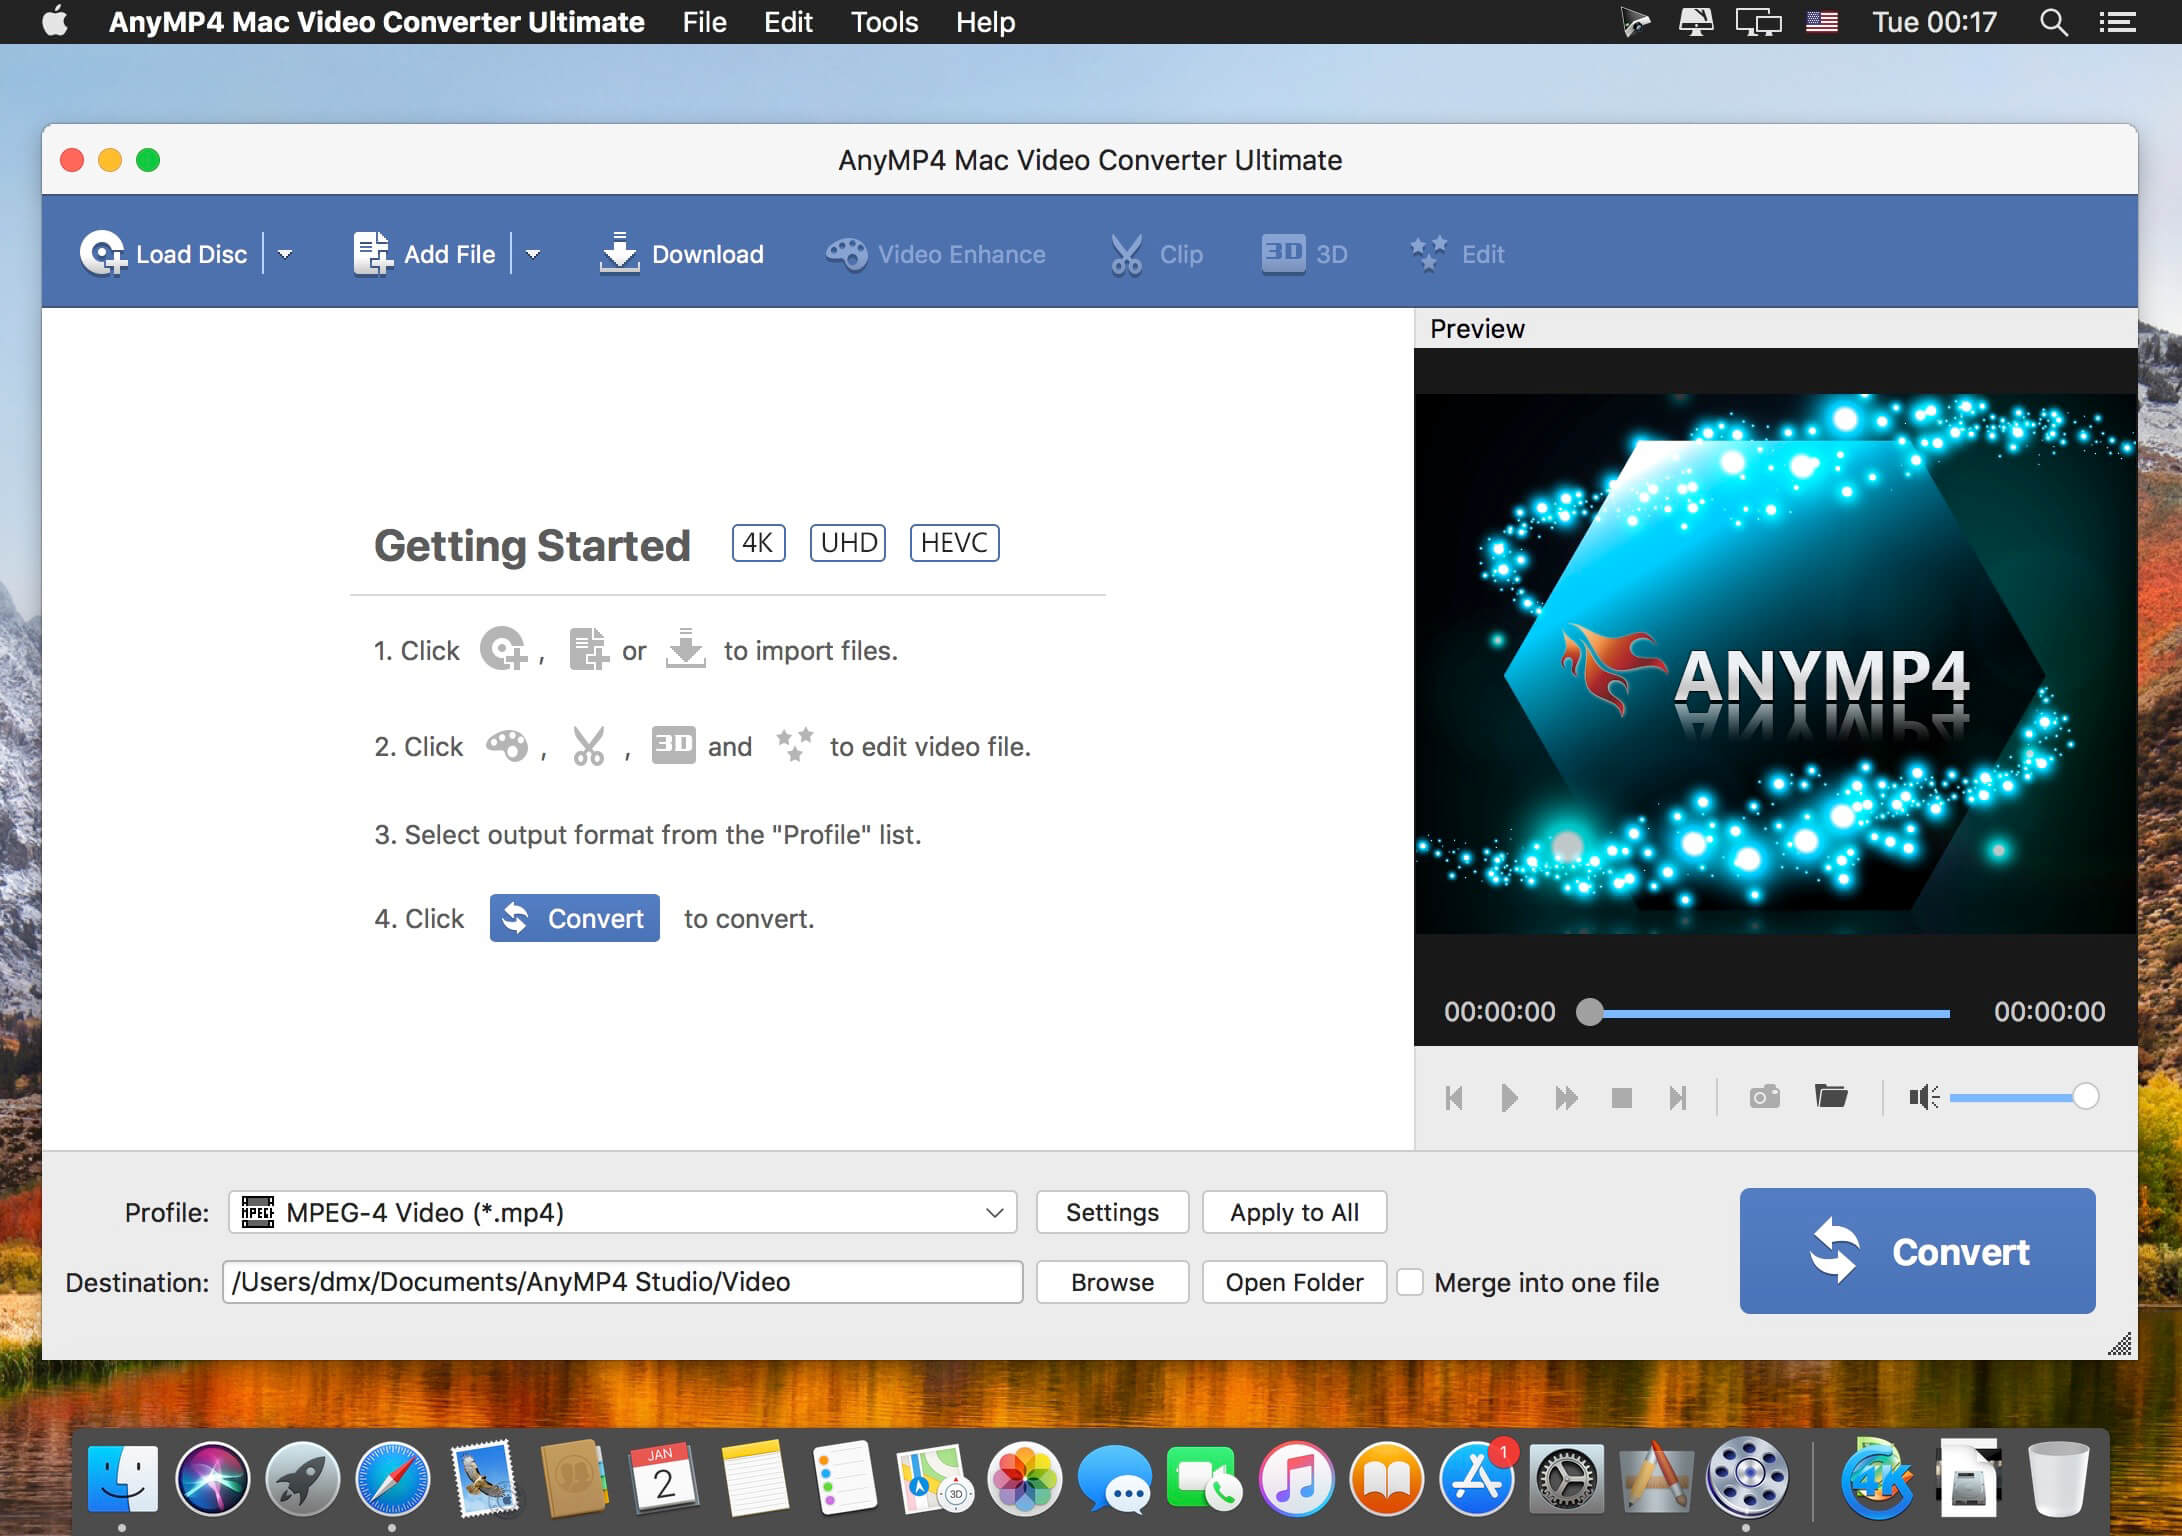 AnyMP4 Video Converter Ultimate 8.5.30 instal the new version for apple